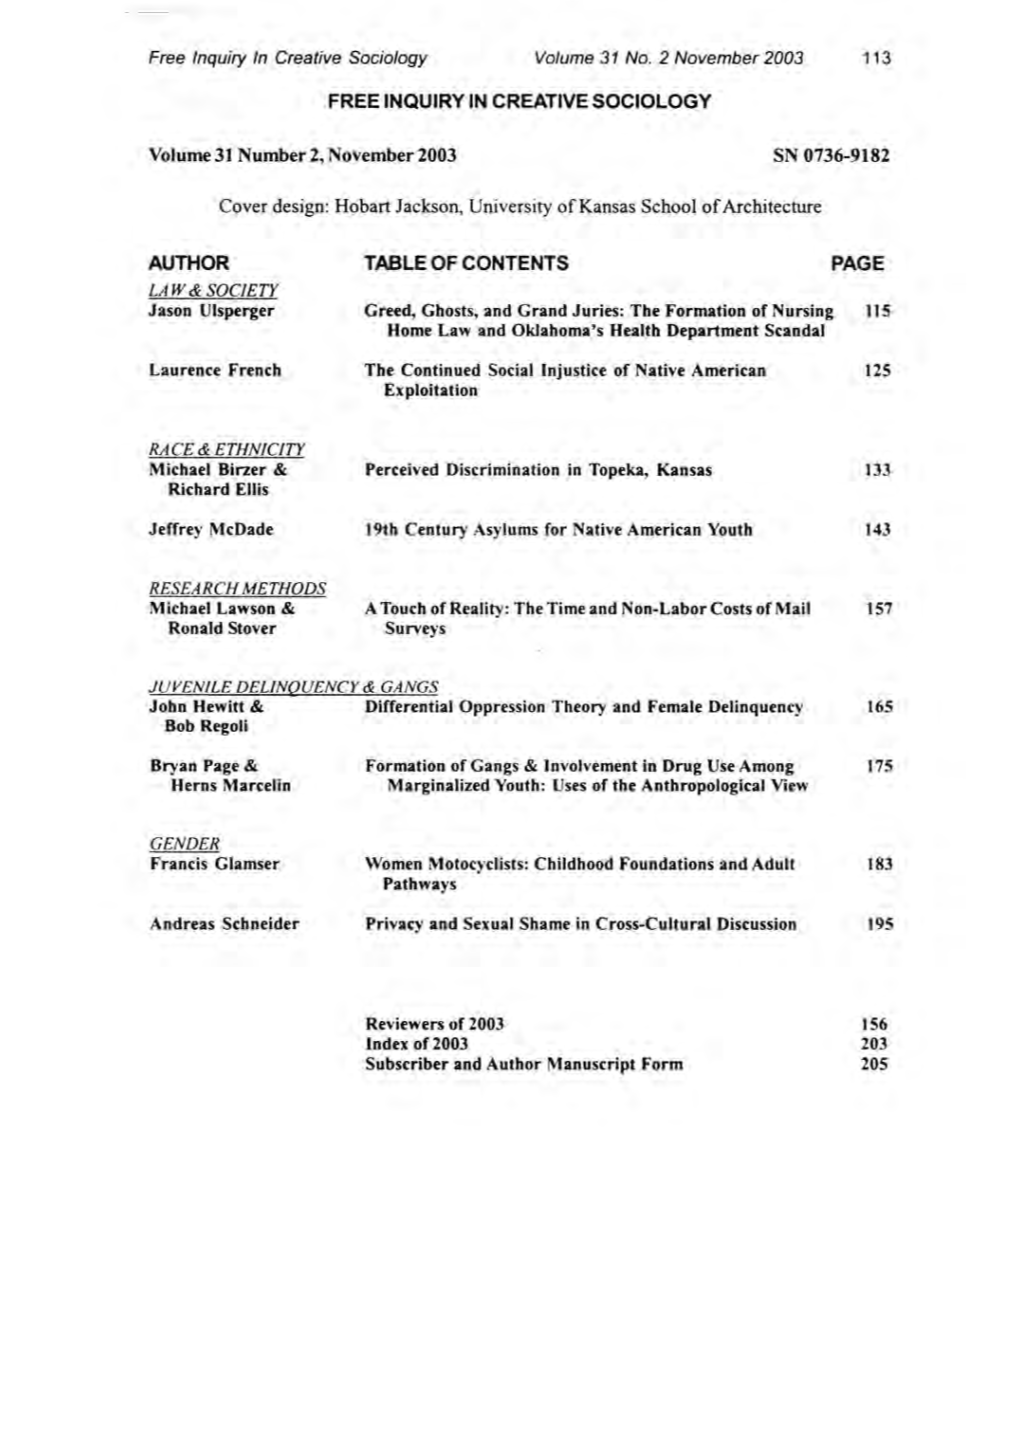 Free Inquiry in Creative Sociology Volume 31 No